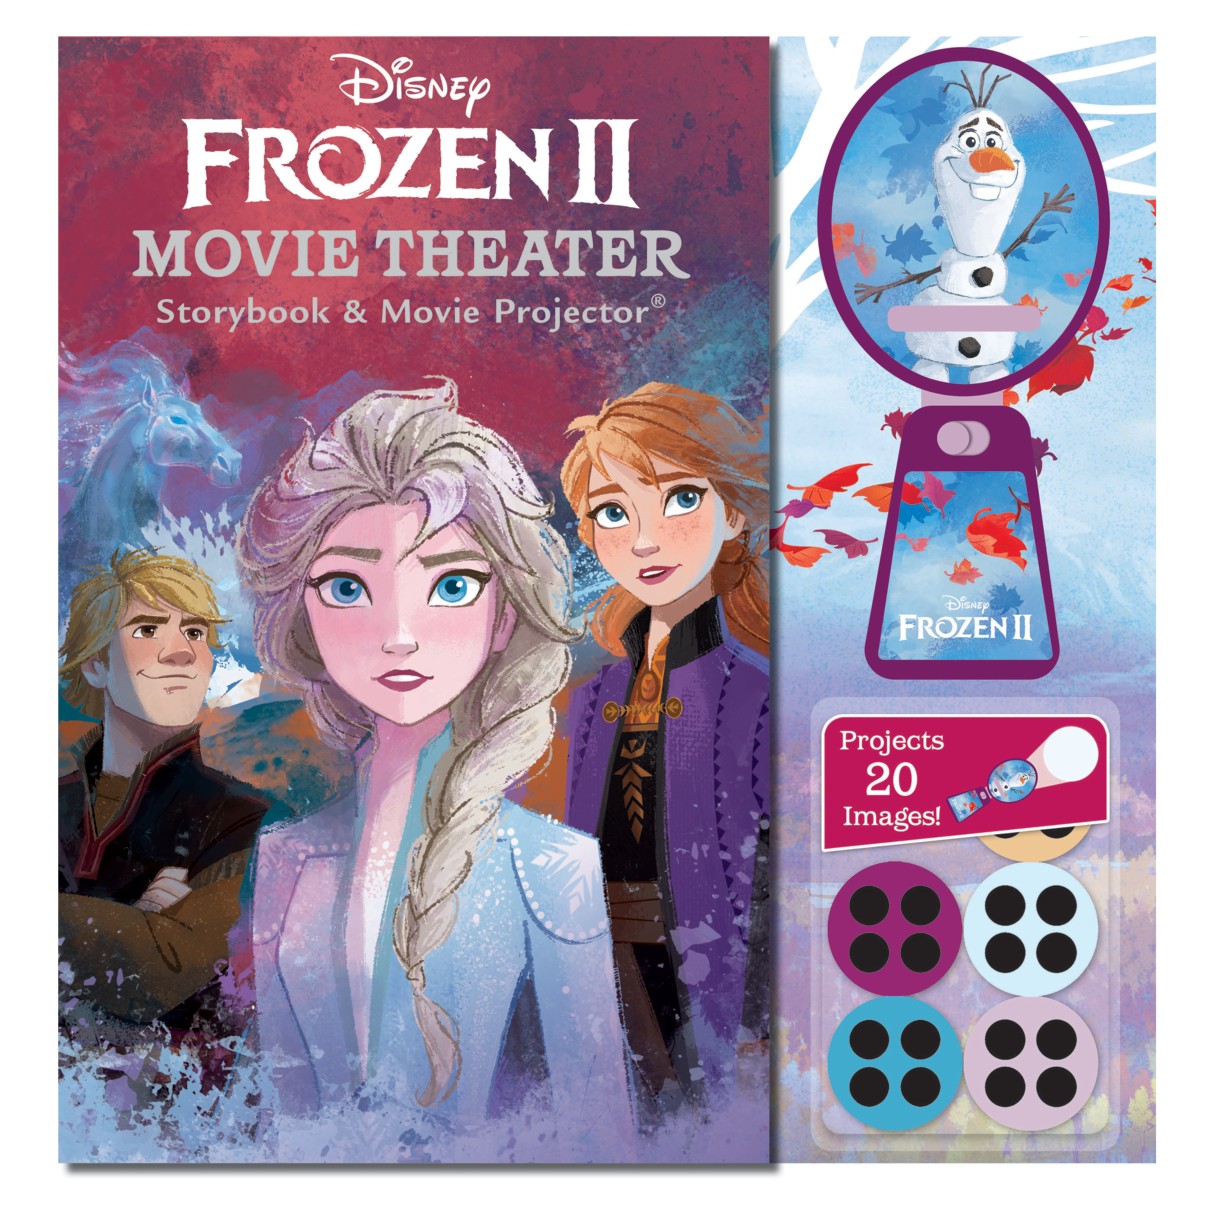 Frozen 2 Movie Theater Storybook and Movie Projector